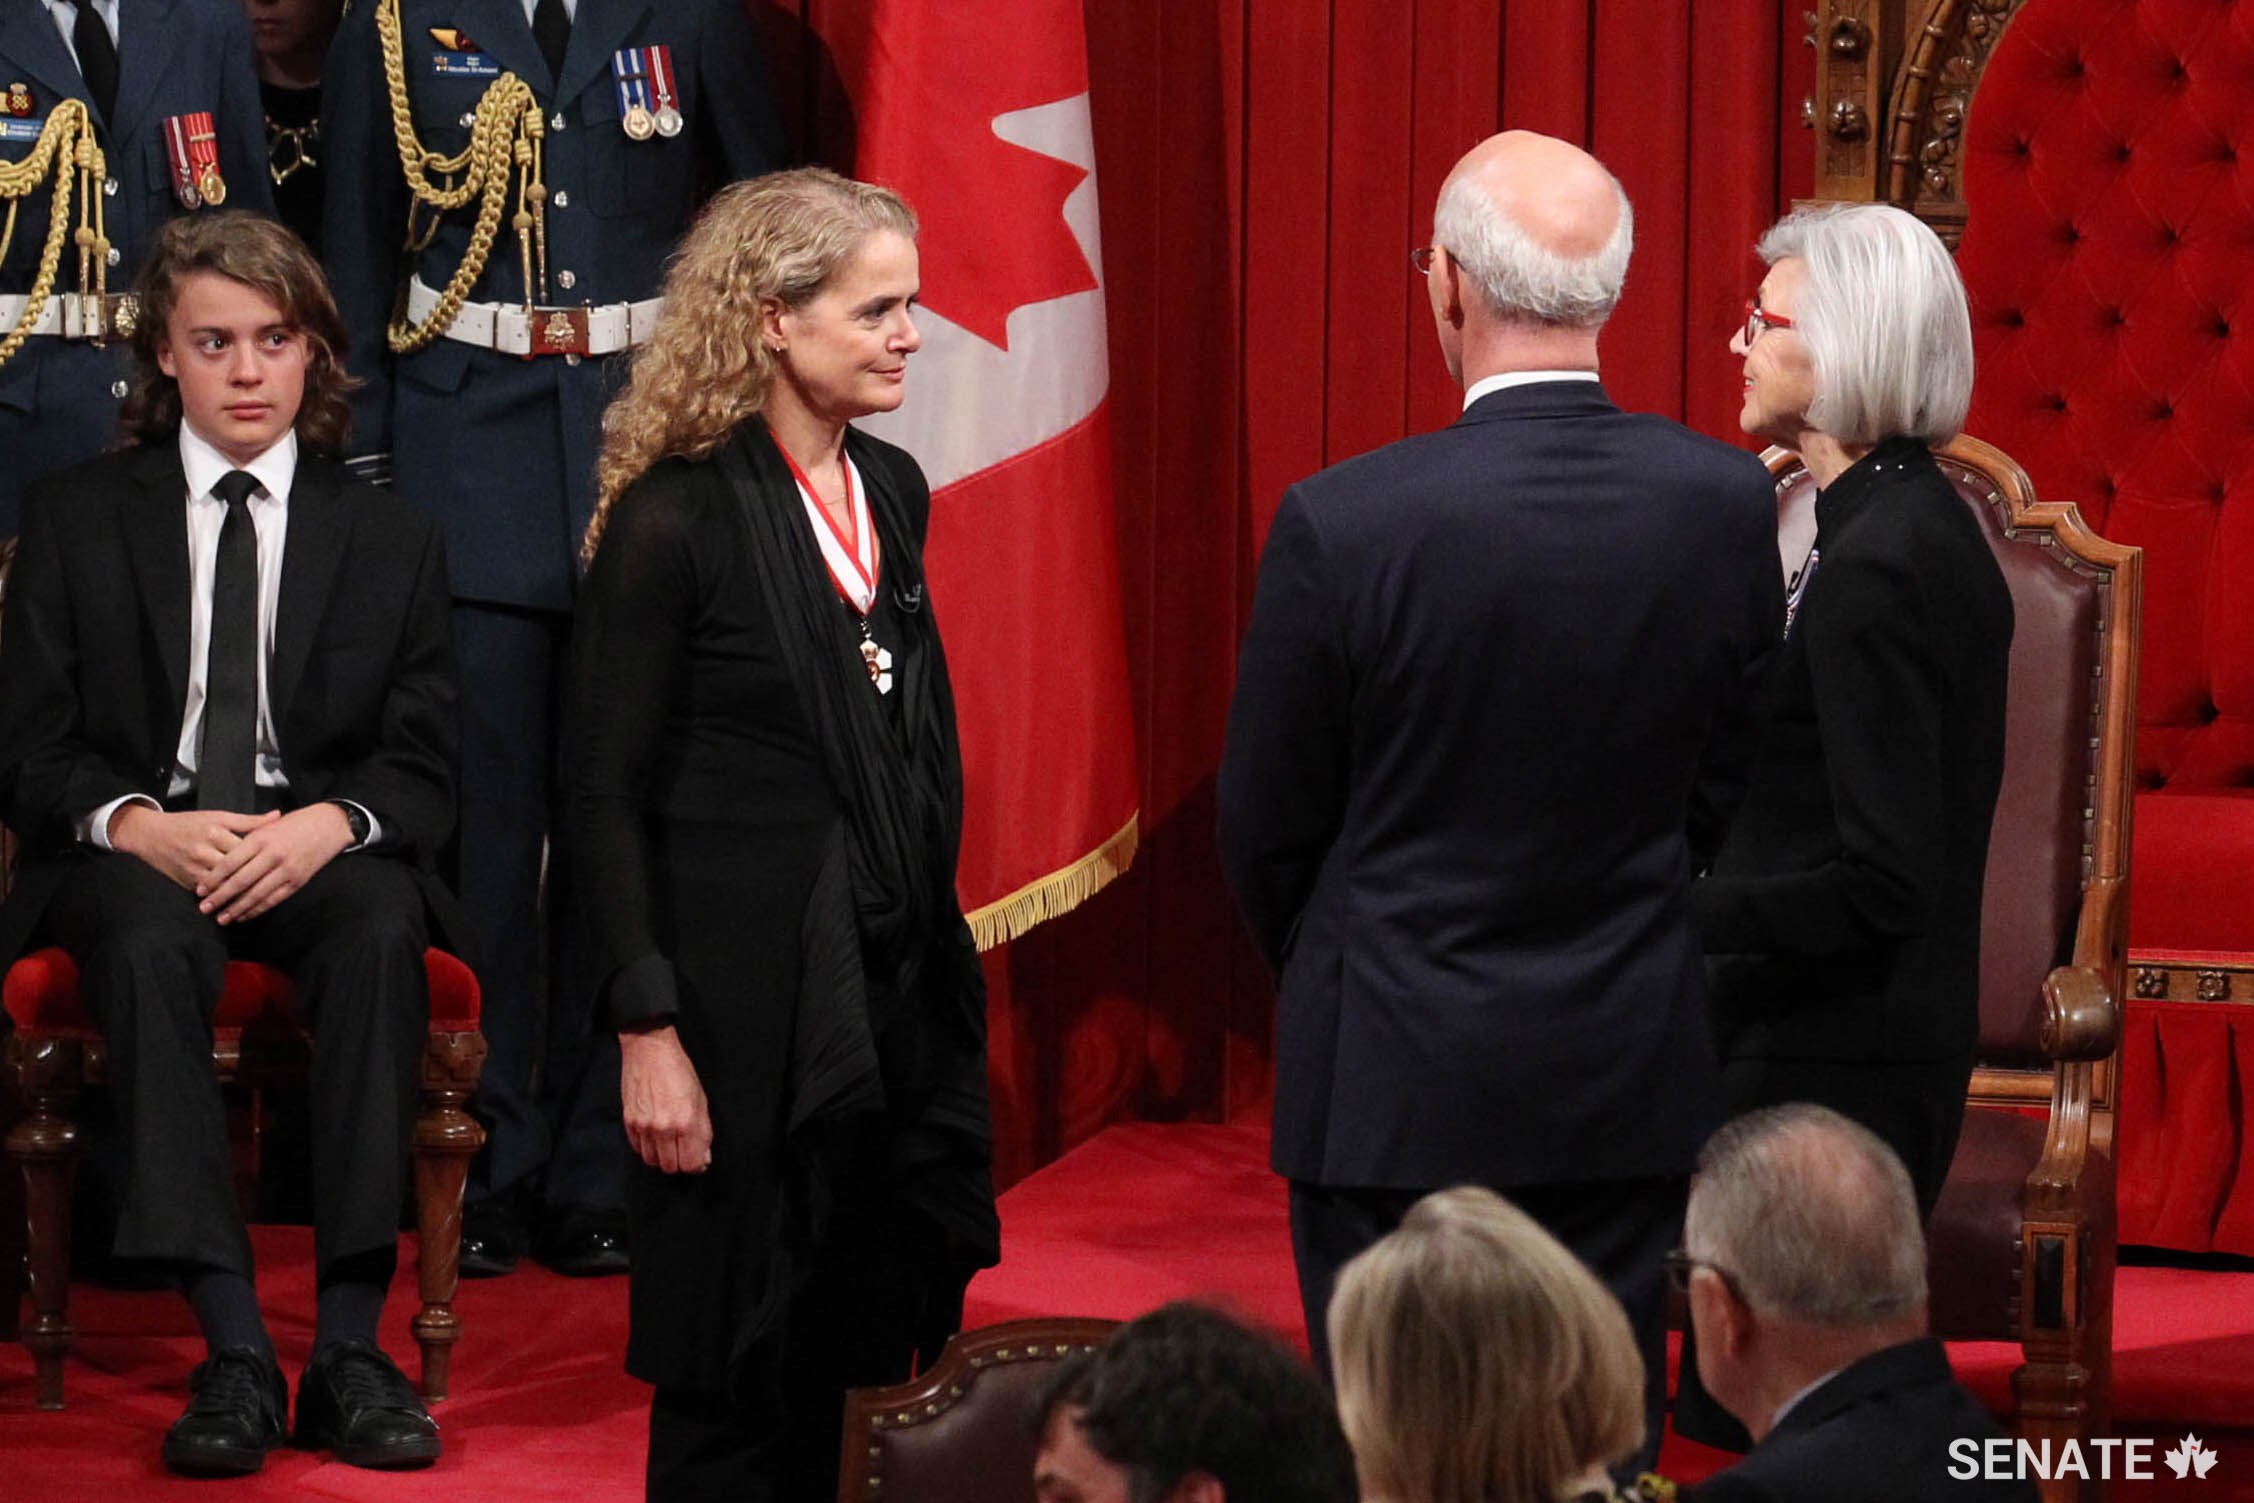 Chief Justice of Canada, Beverley McLachlin (centre) administers the formal oaths of office as Governor General Designate Julie Payette’s son, Laurier Payette Flynn, sits close by.